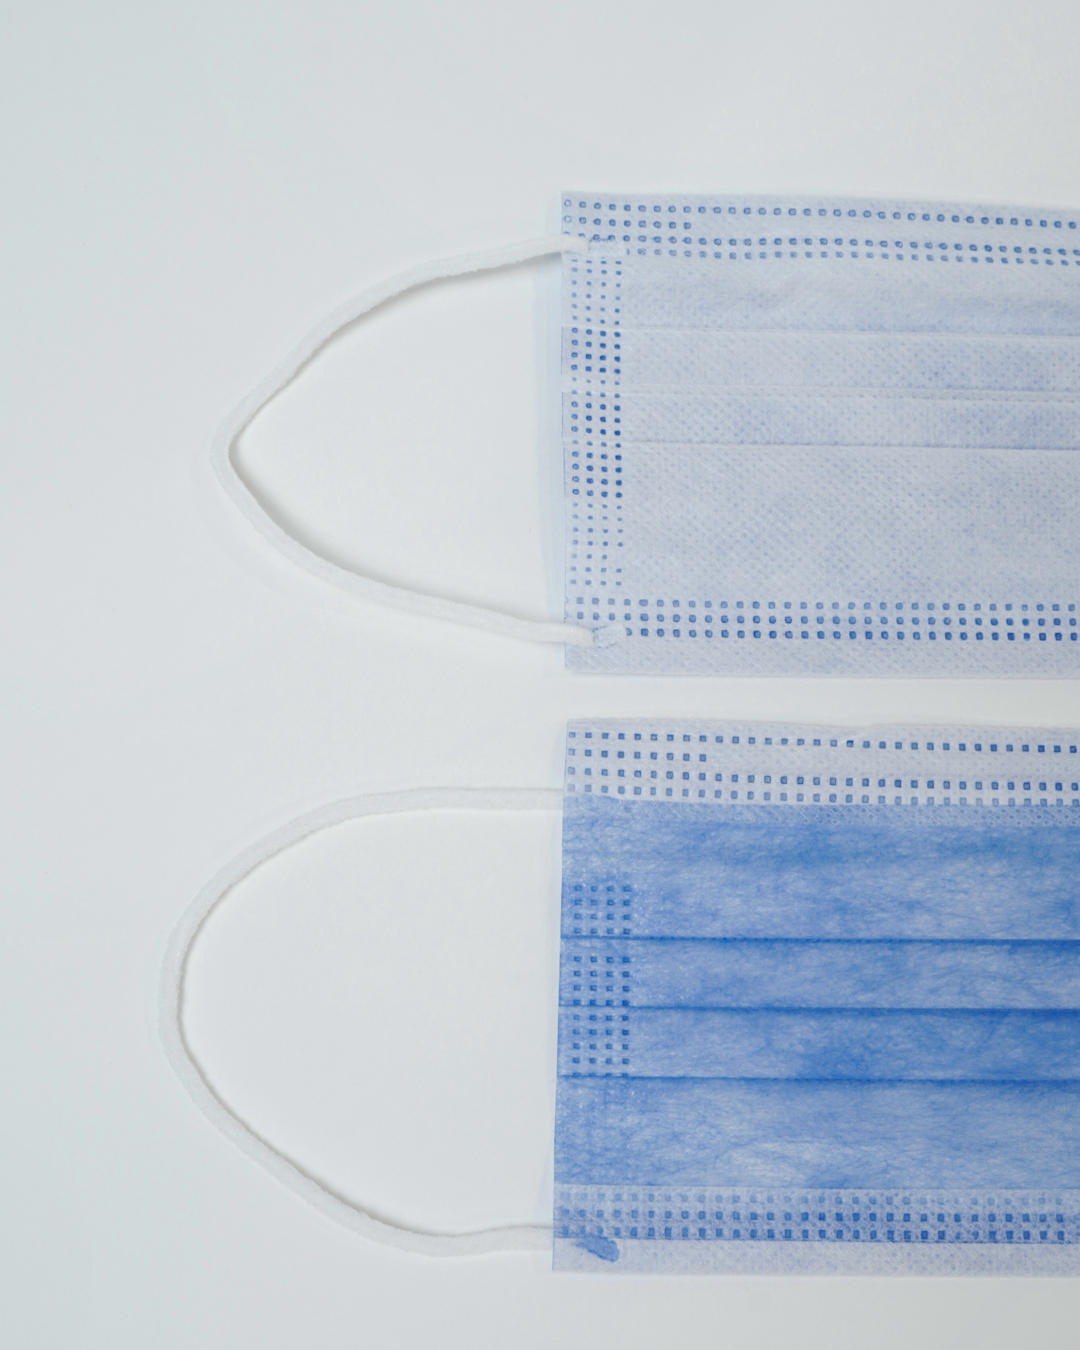 blue disposable surgical mask